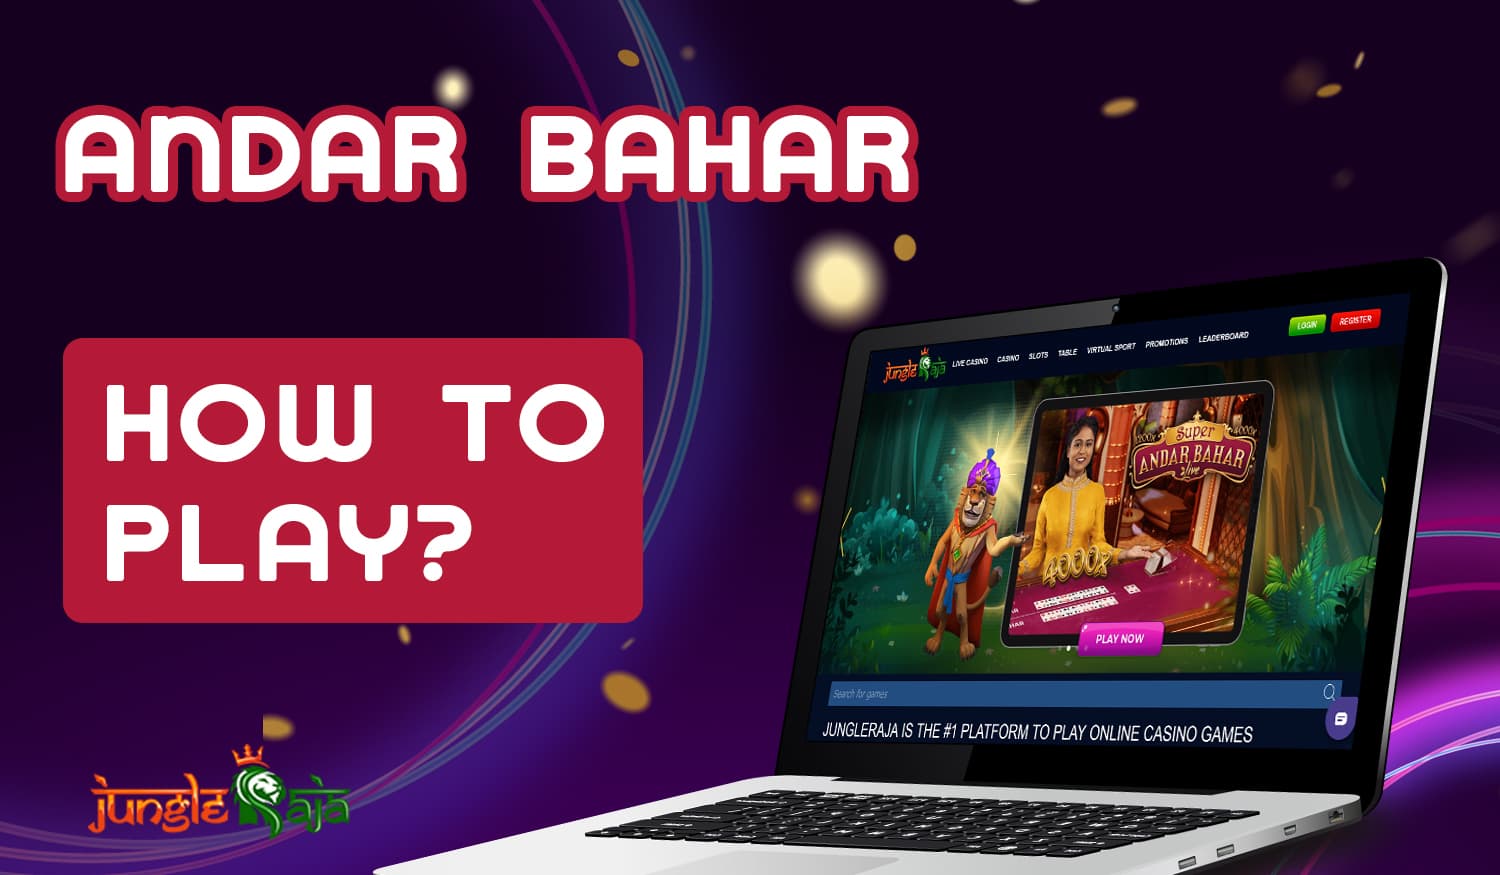 Detailed instructions for new users of JungleRaja casino how to start playing Andar Bahar